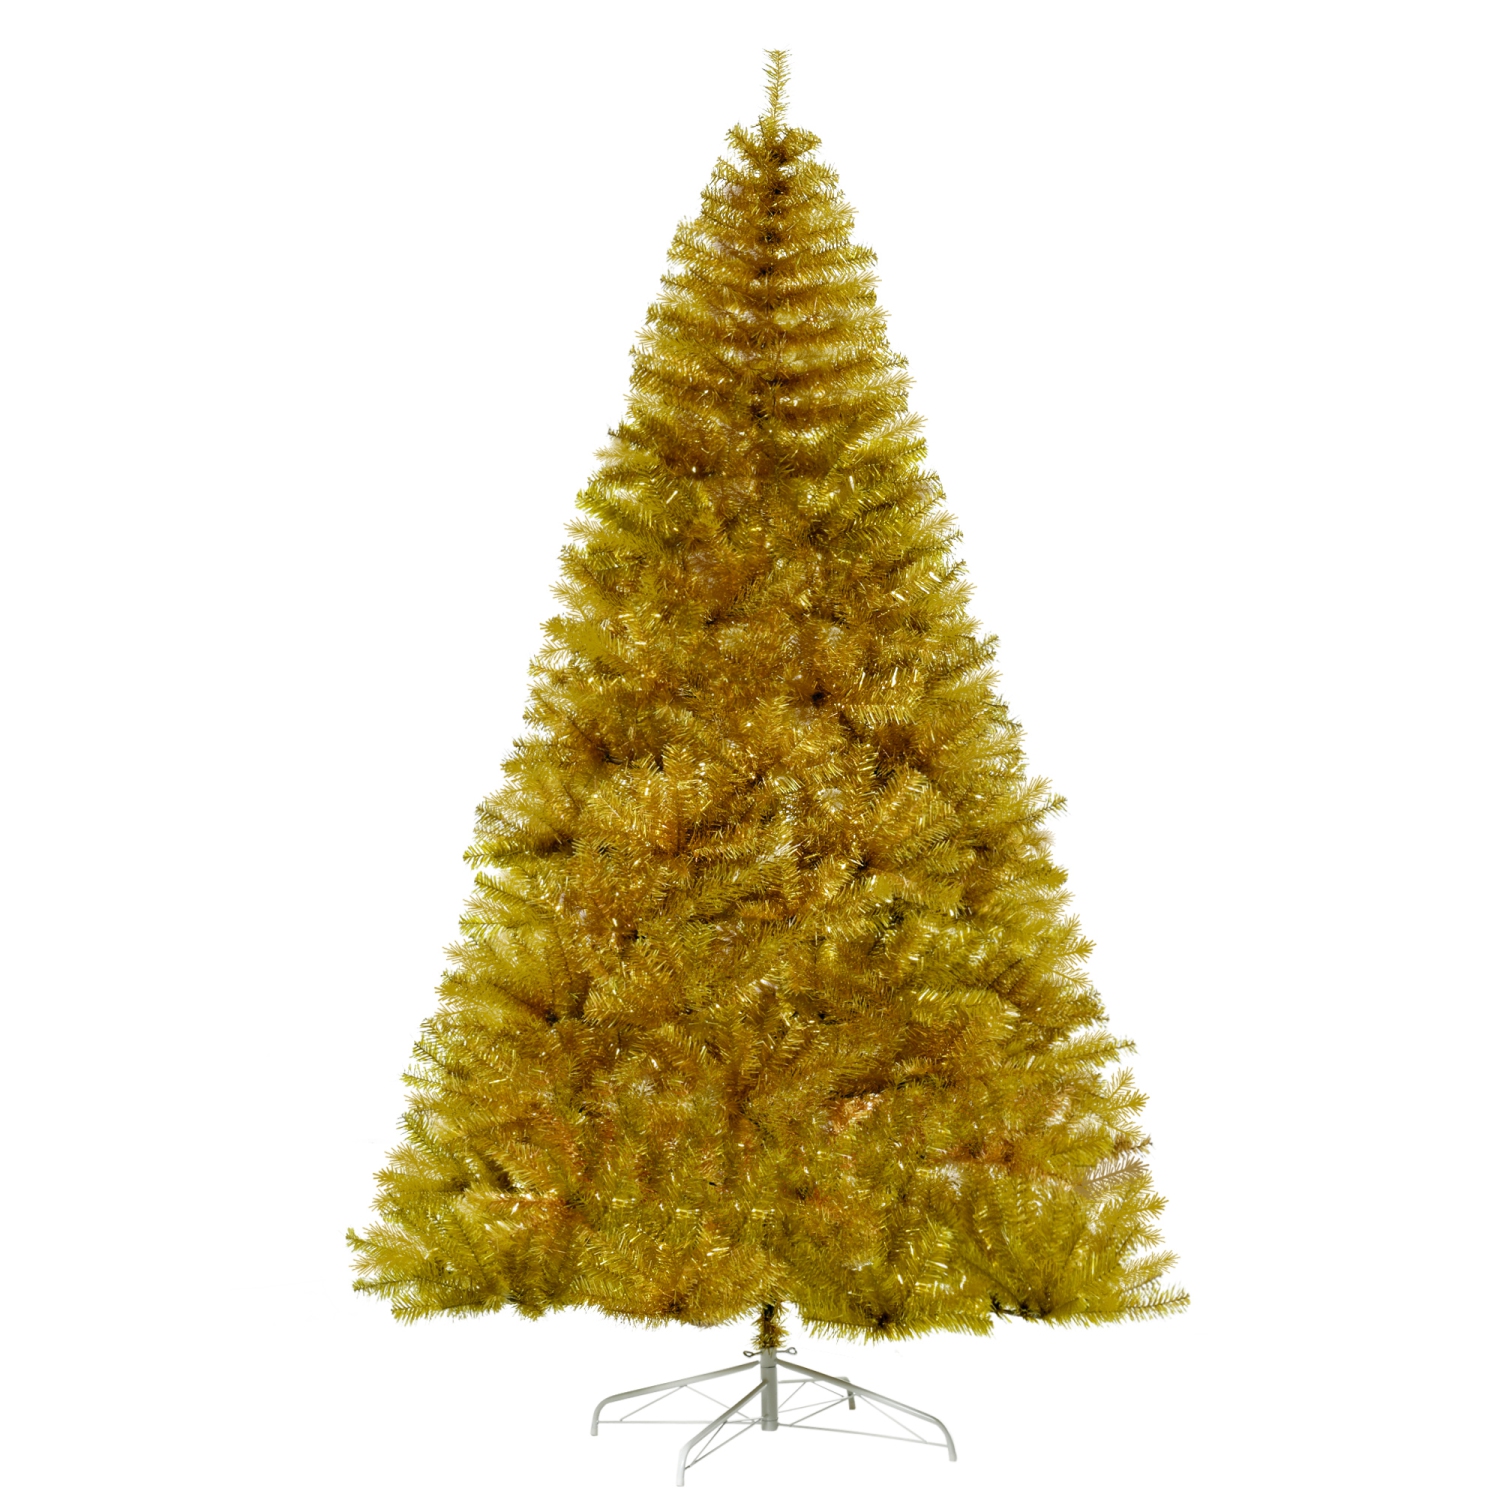 HOMCOM 7.5FT Artificial Christmas Tree Golden Xmas Tree for Holiday Carnival Party Decorations